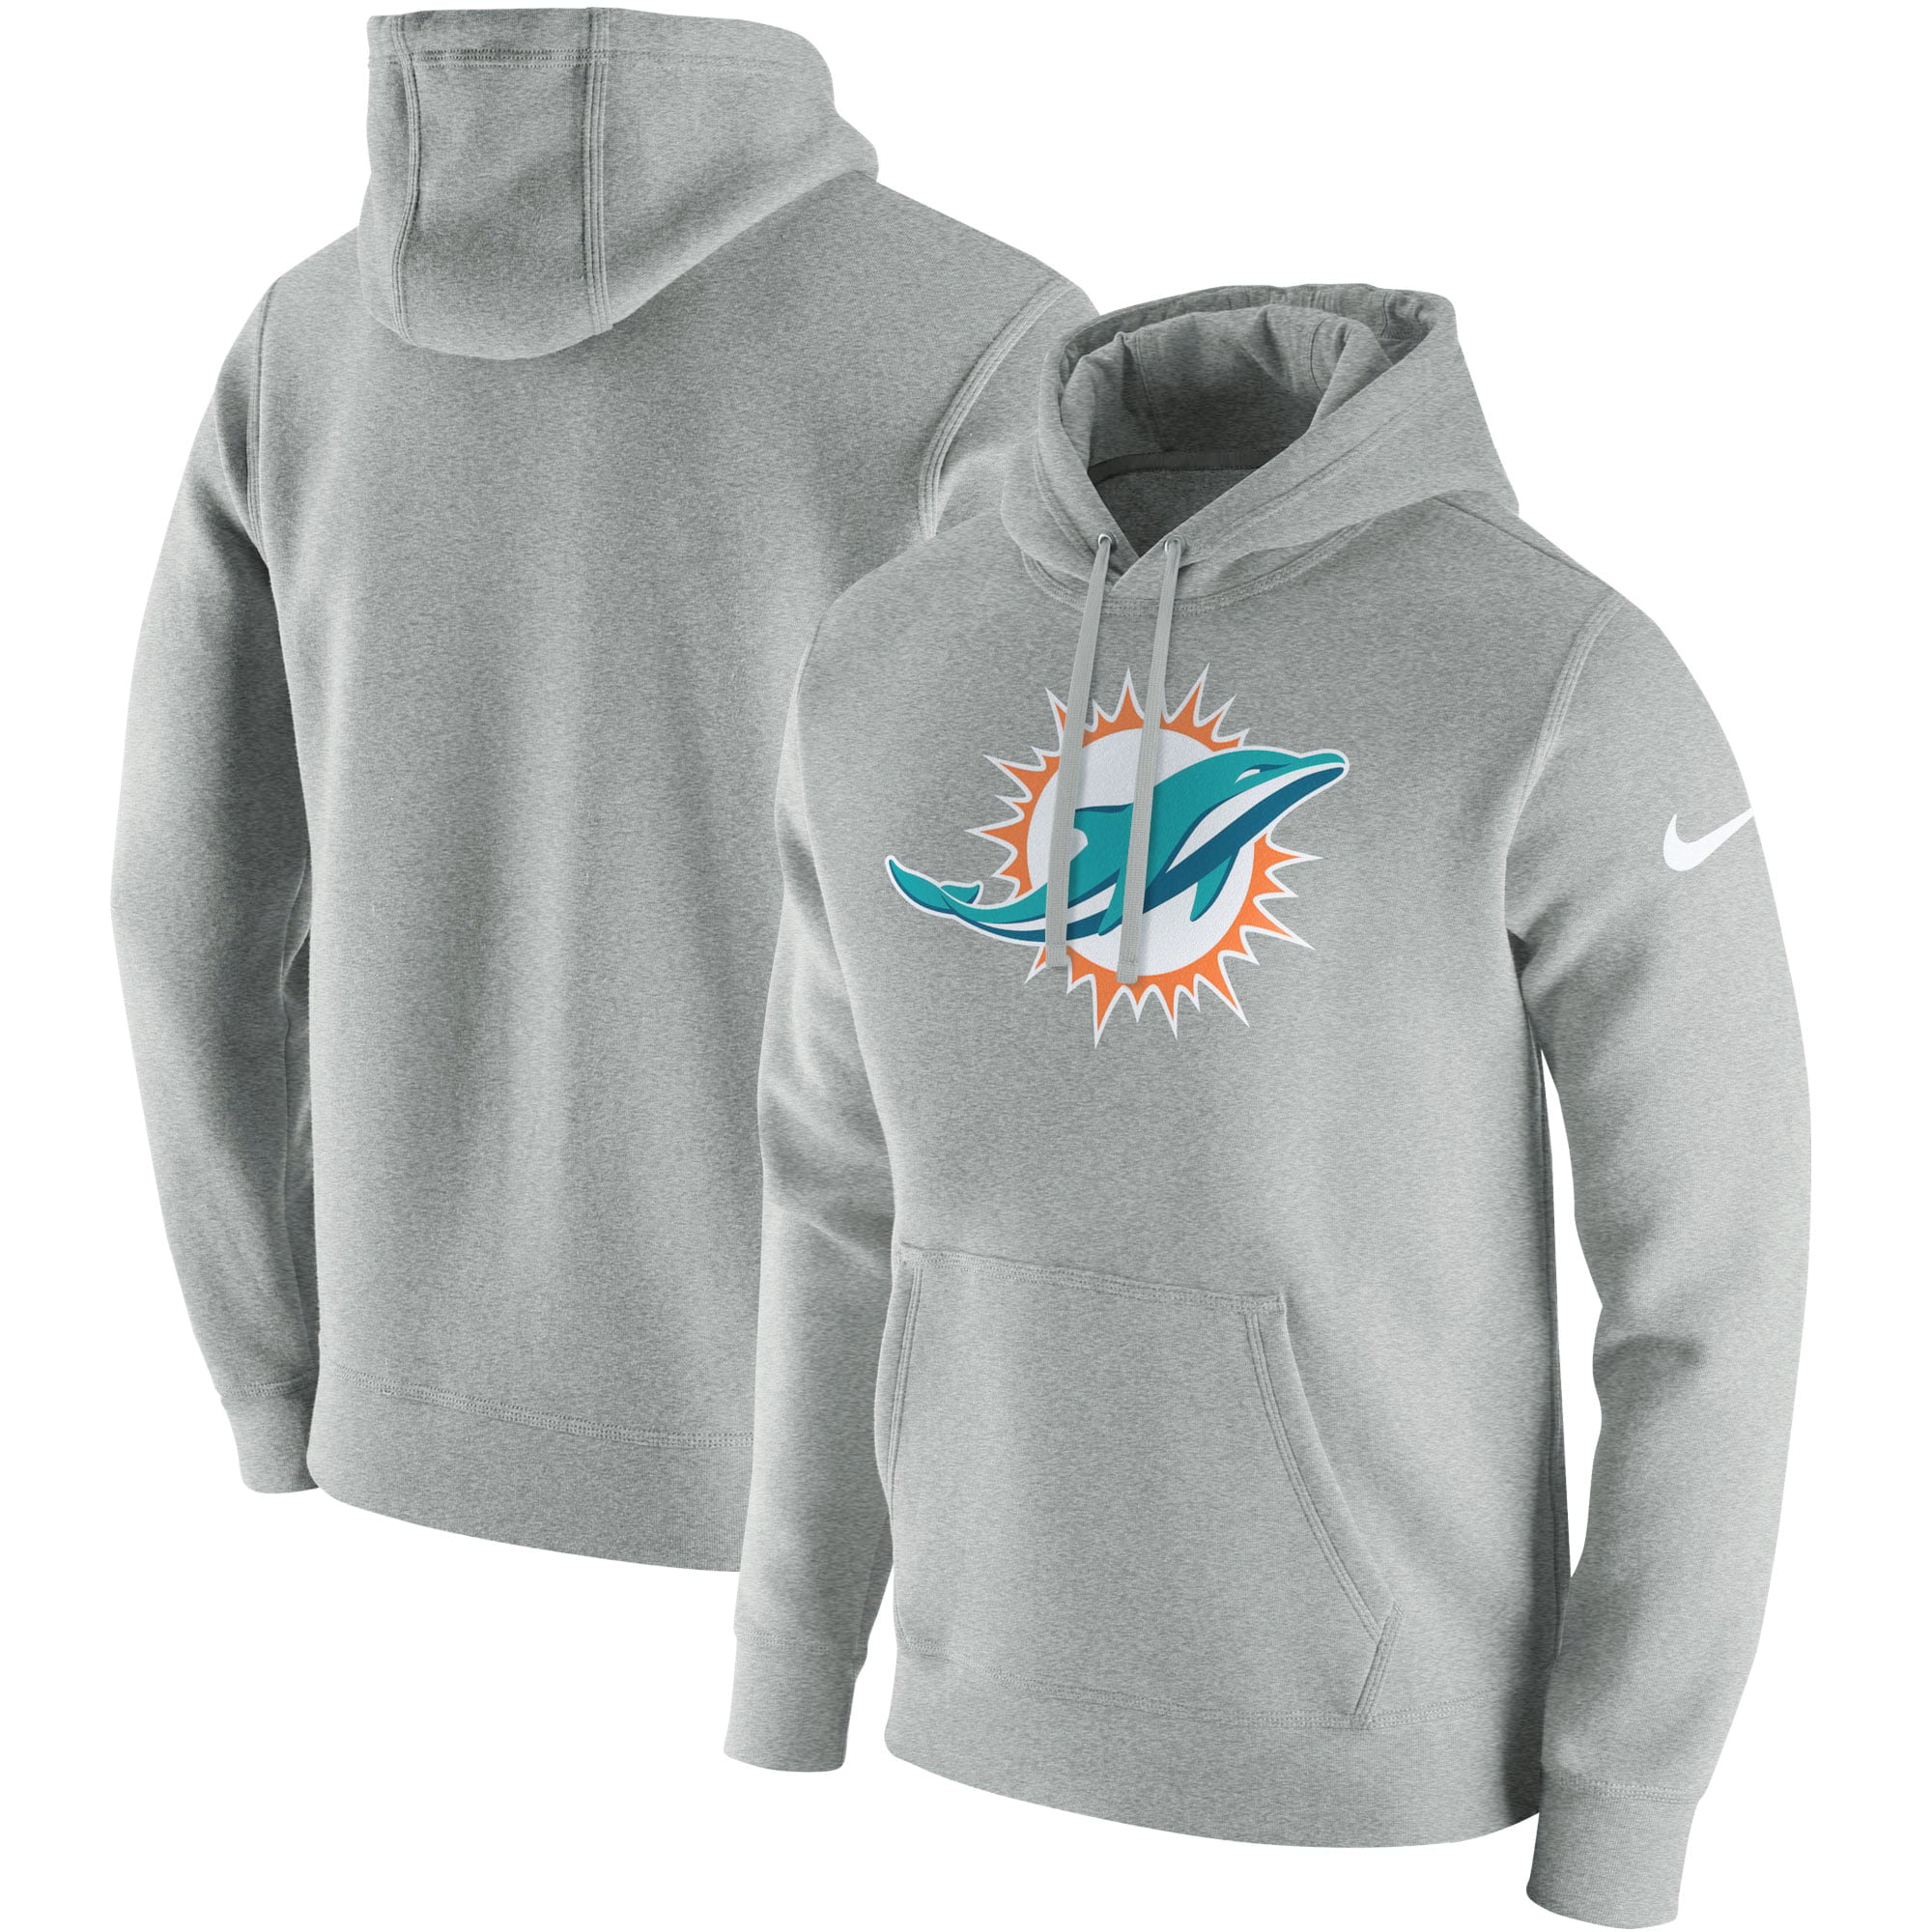 Miami Dolphins Nike Club Fleece Pullover Hoodie - Heathered Gray ...